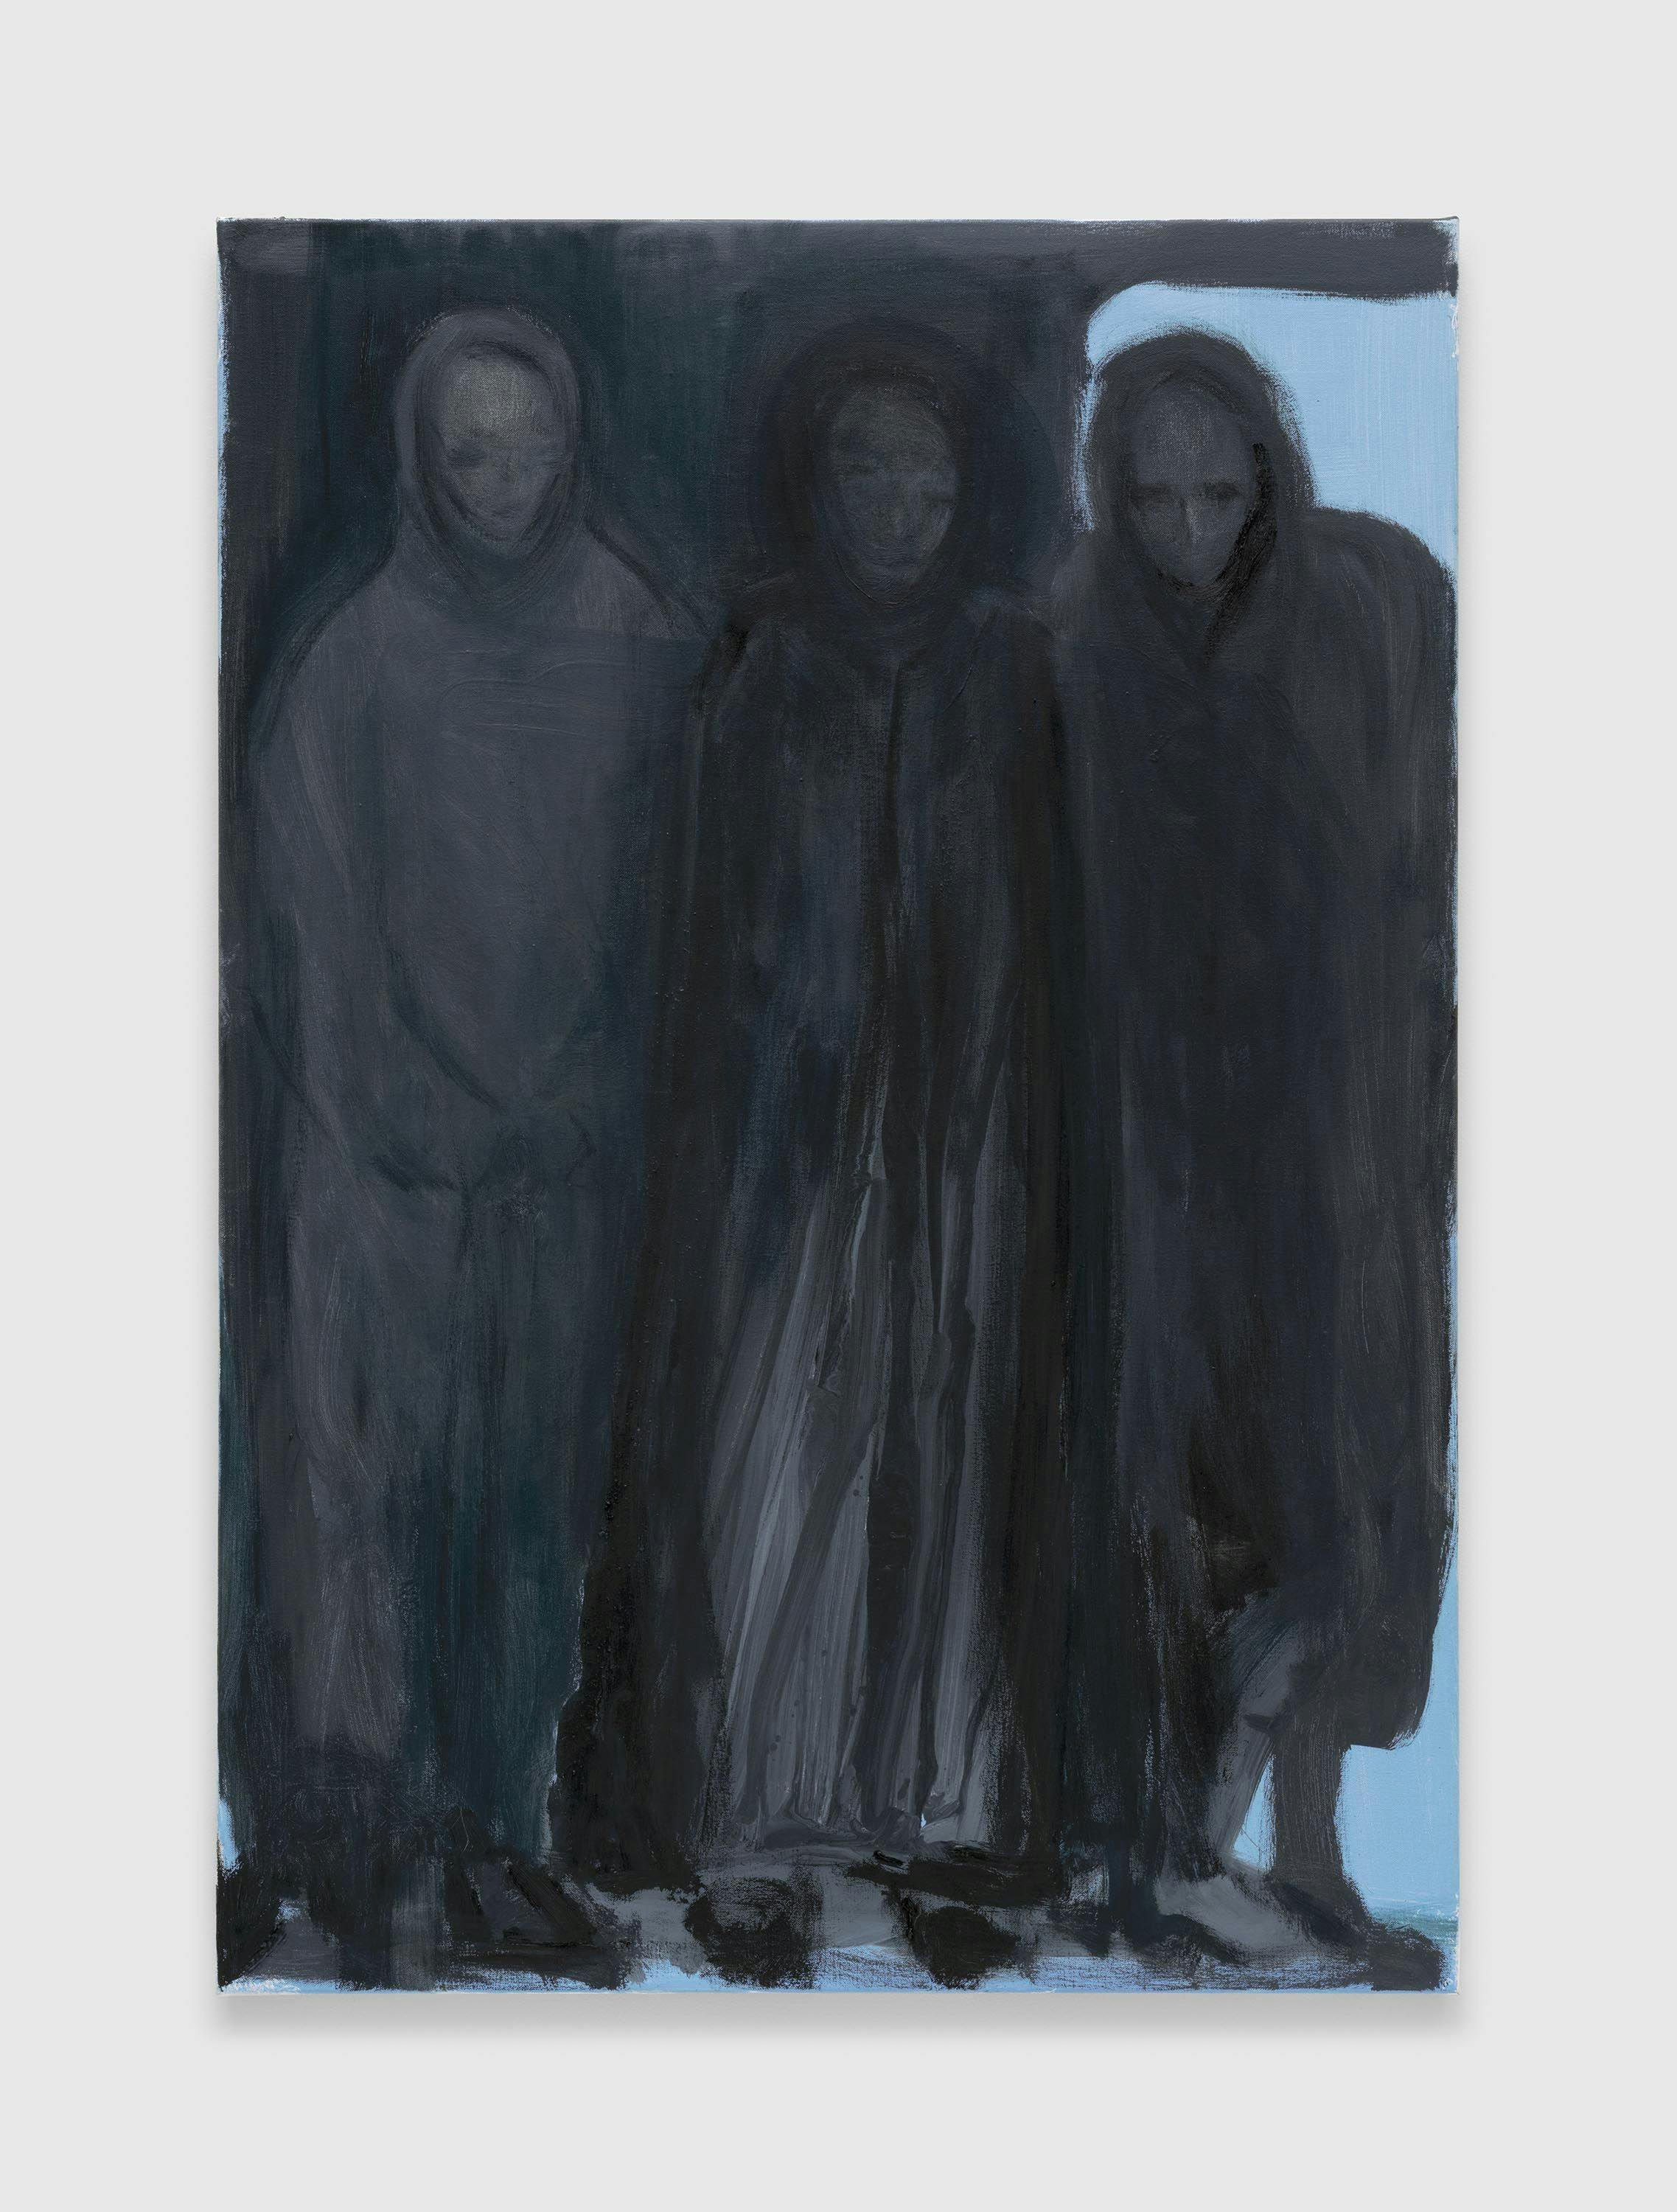 A painting by Marlene Dumas, titled ﻿Crowded, 2020 to 2021.